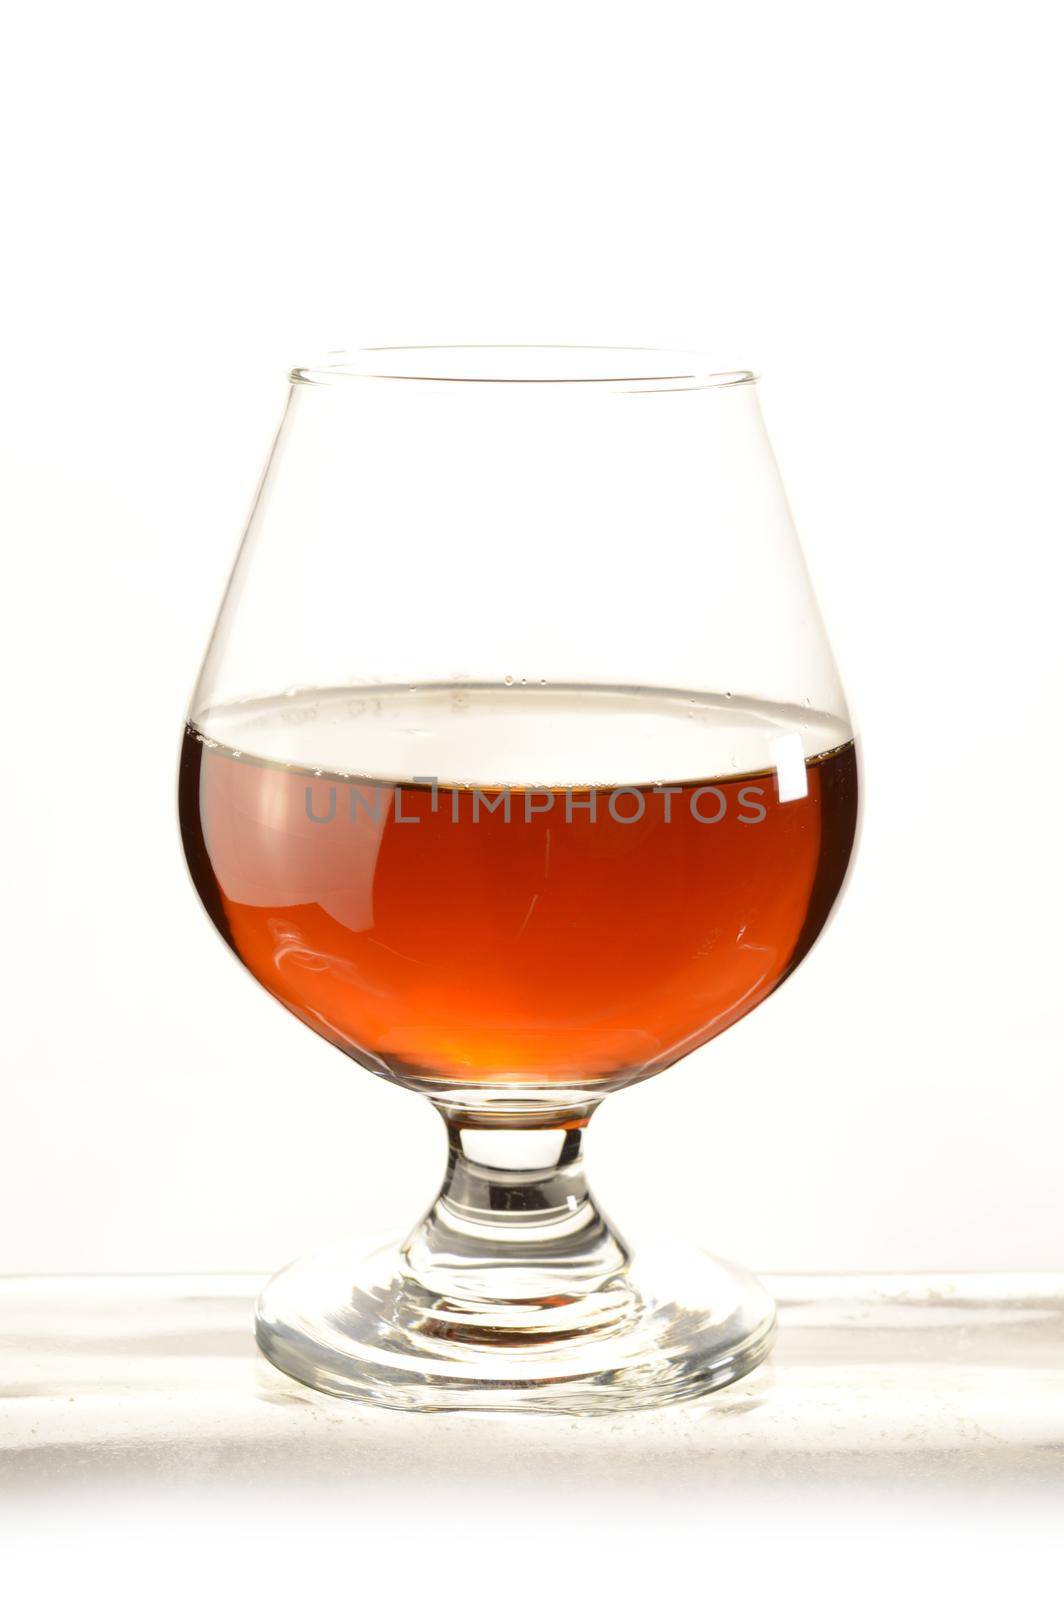 A glass of Cognac over a white background.